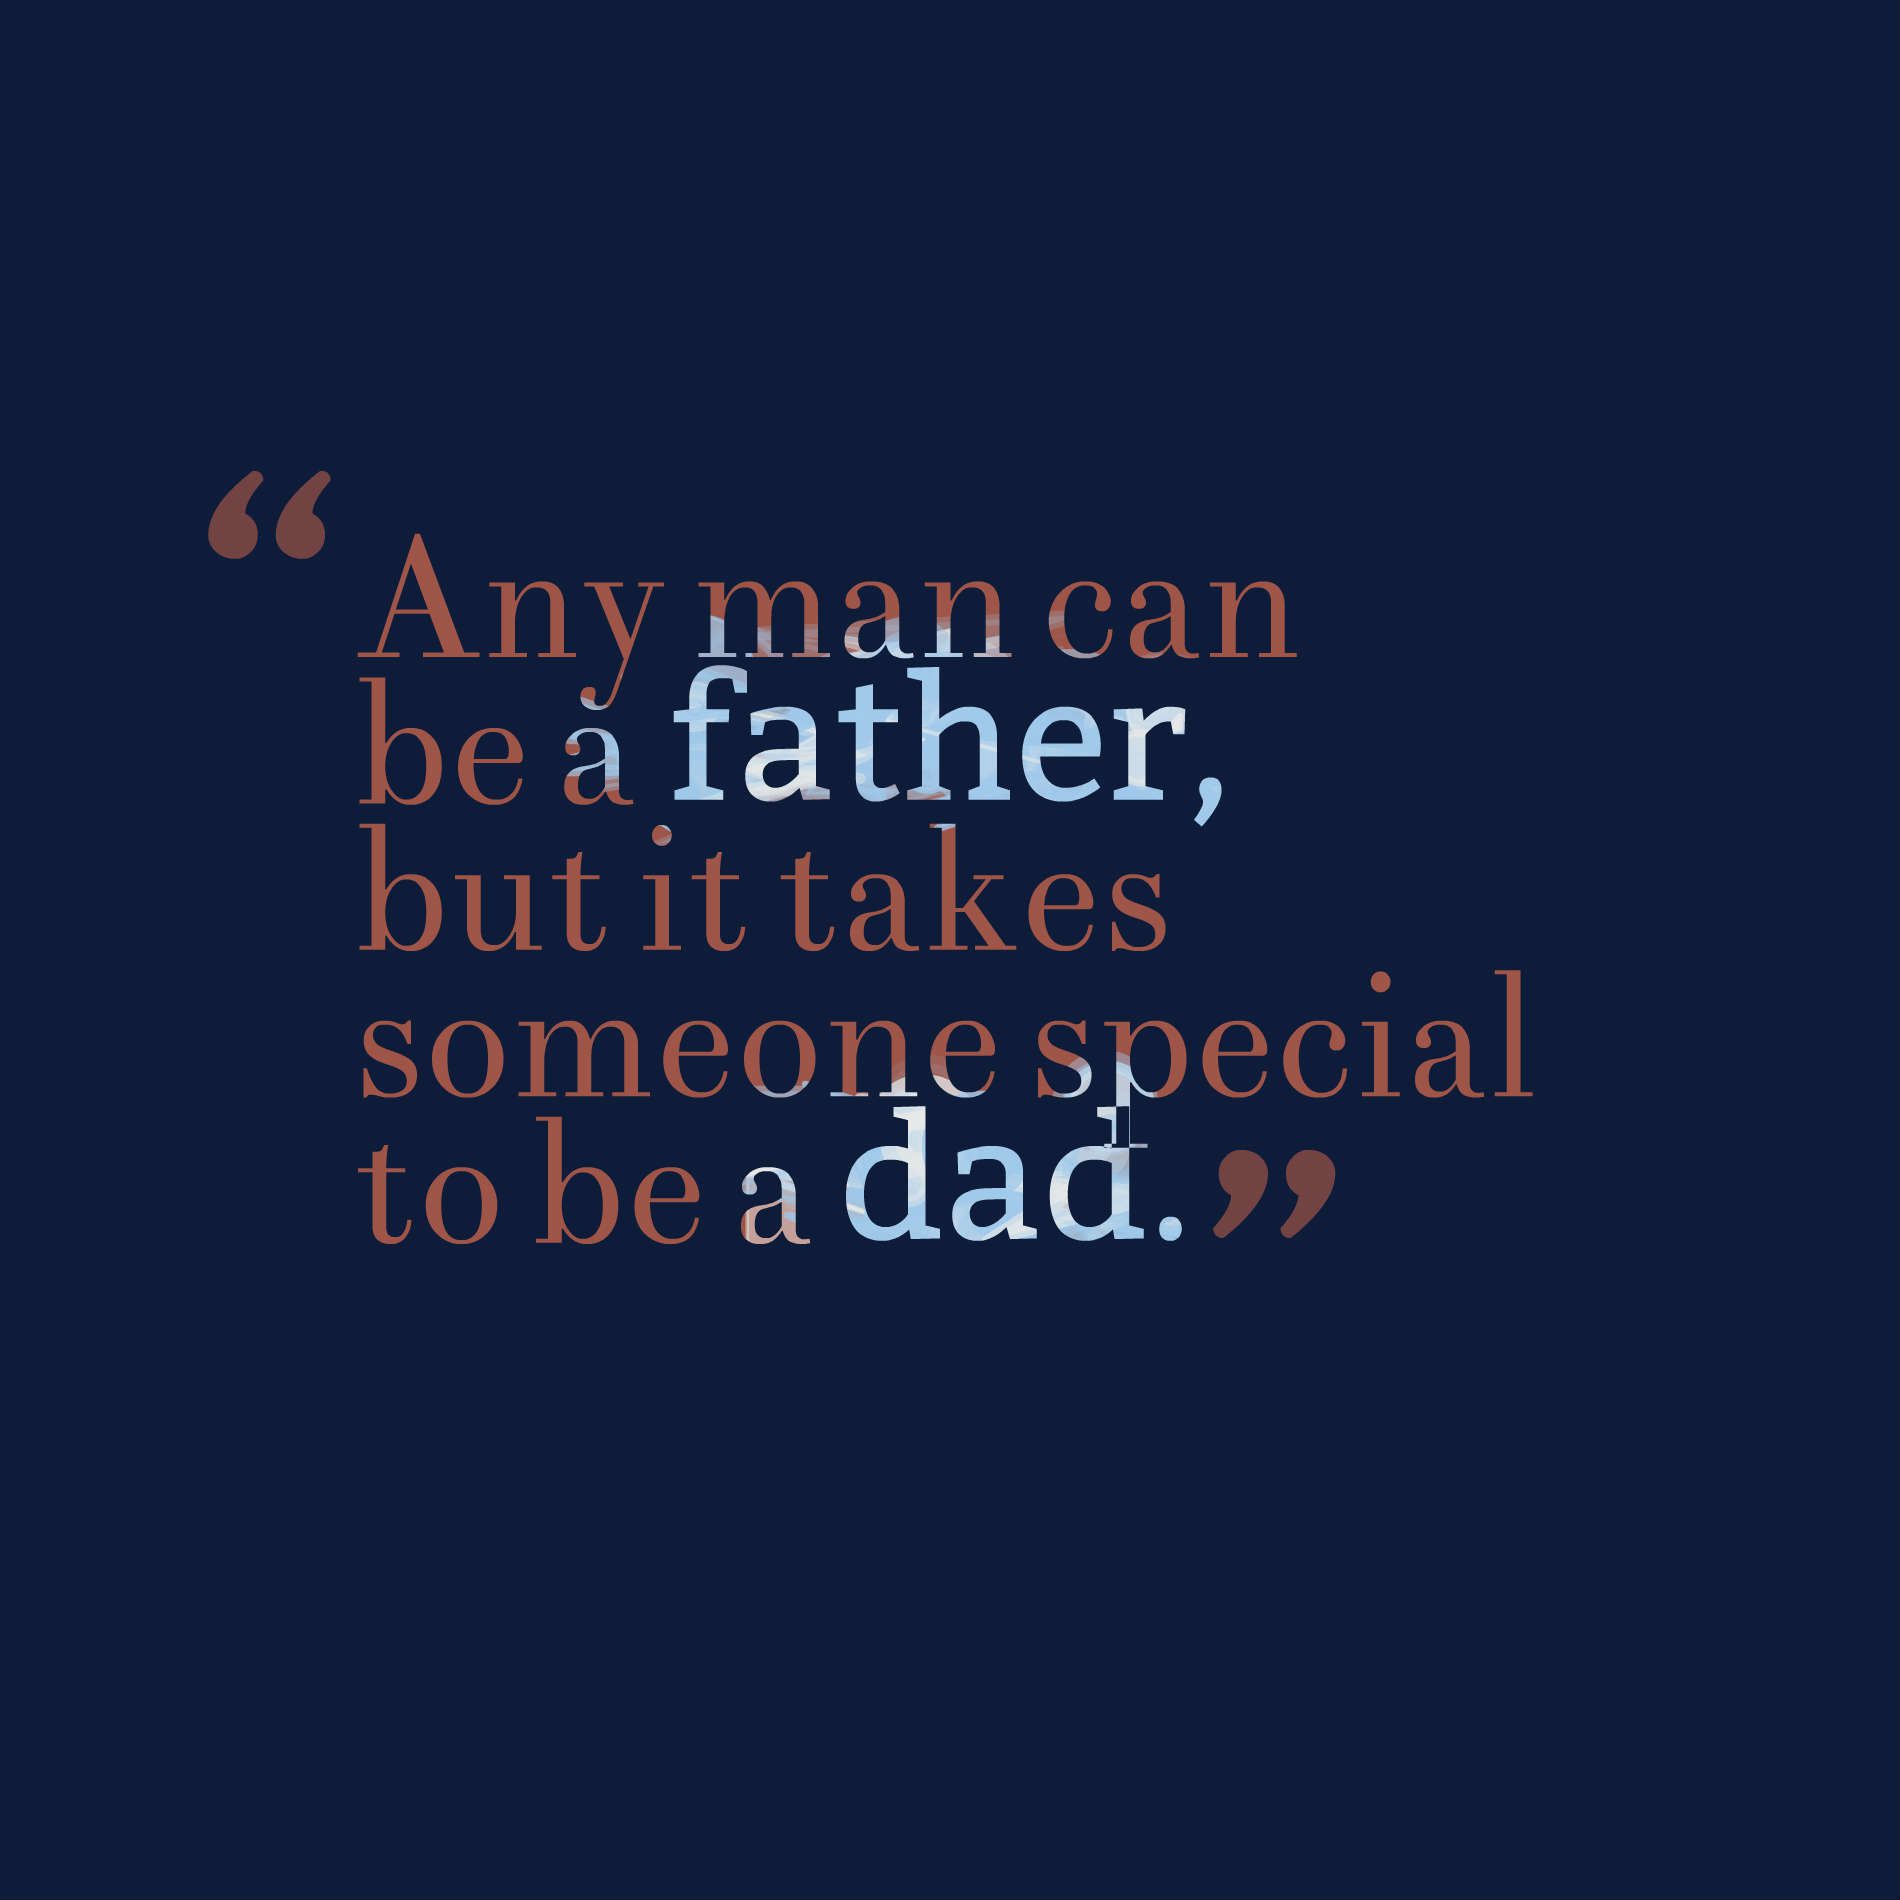 Any man can be a father, but it takes someone special to be a dad .